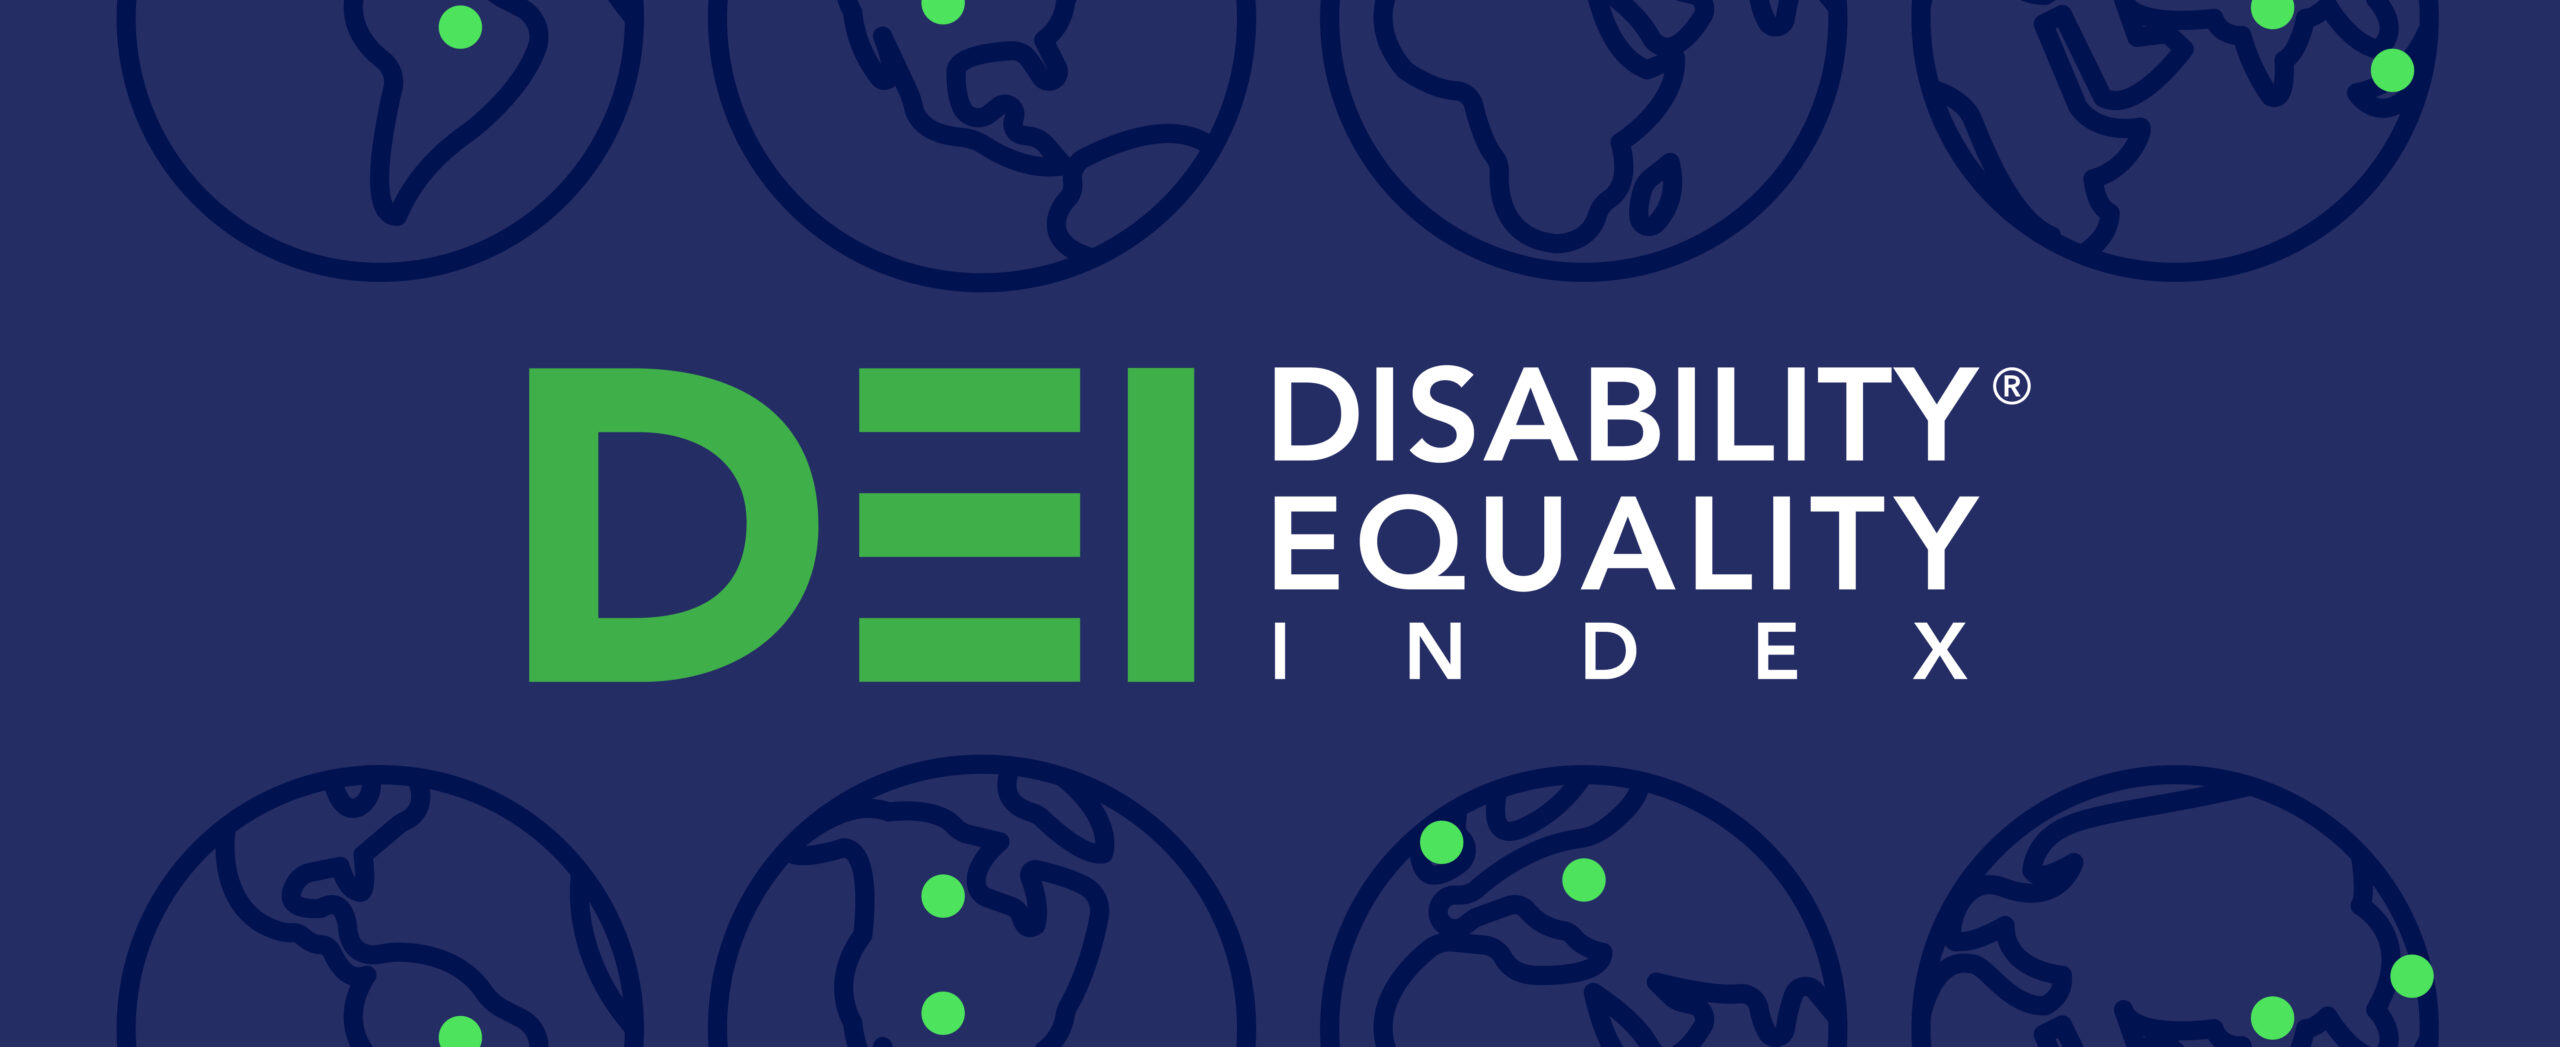 HR Brew: World of HR: Disability Equality Index expands globally